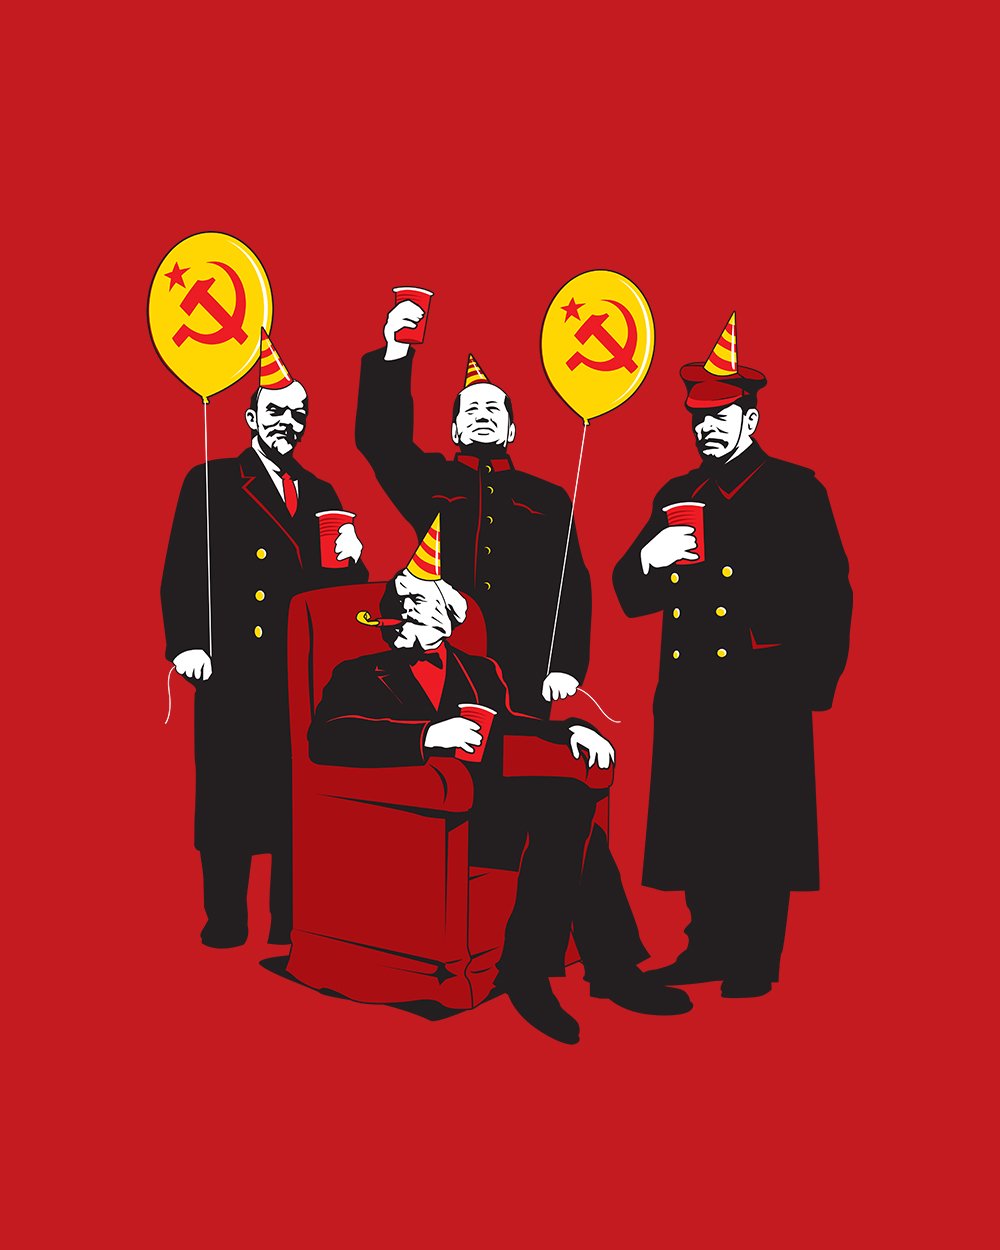 The Communist Party 2: The Communing T-Shirt Australia Online #colour_red